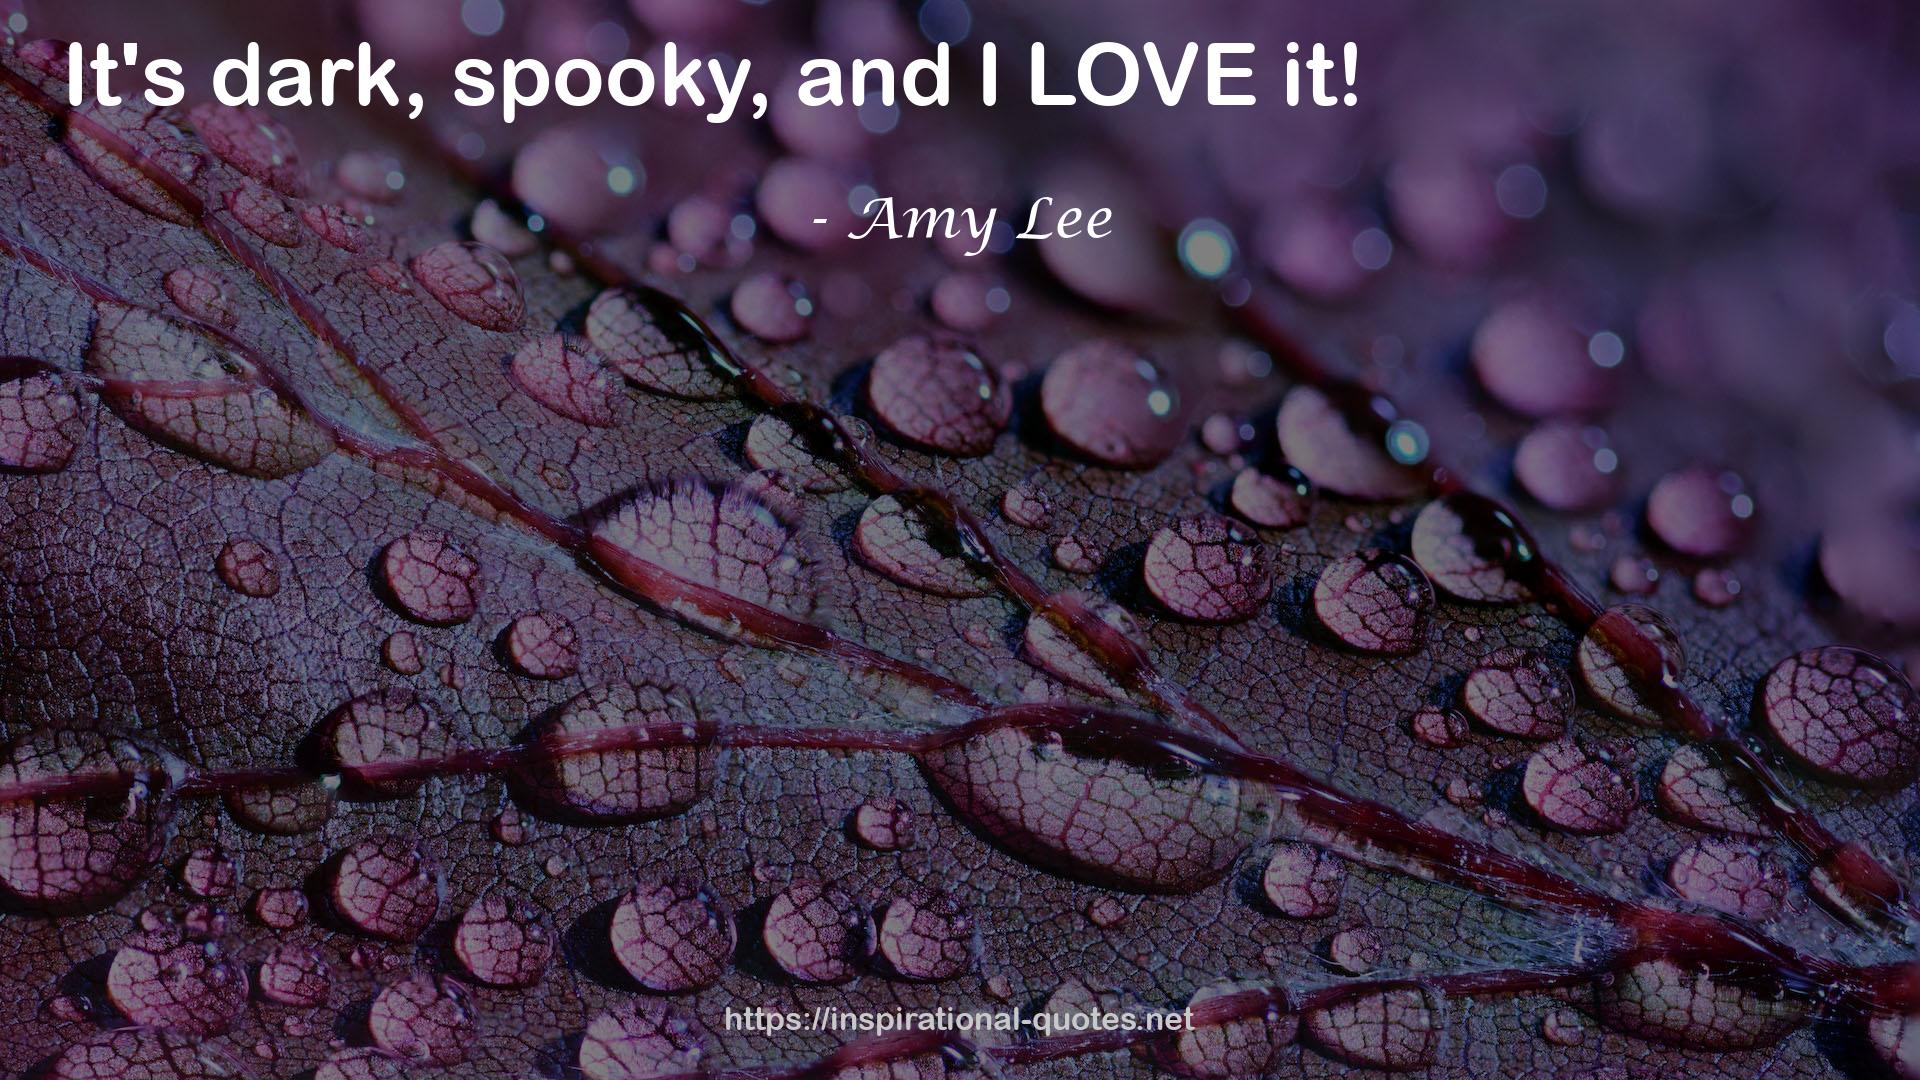 Amy Lee QUOTES